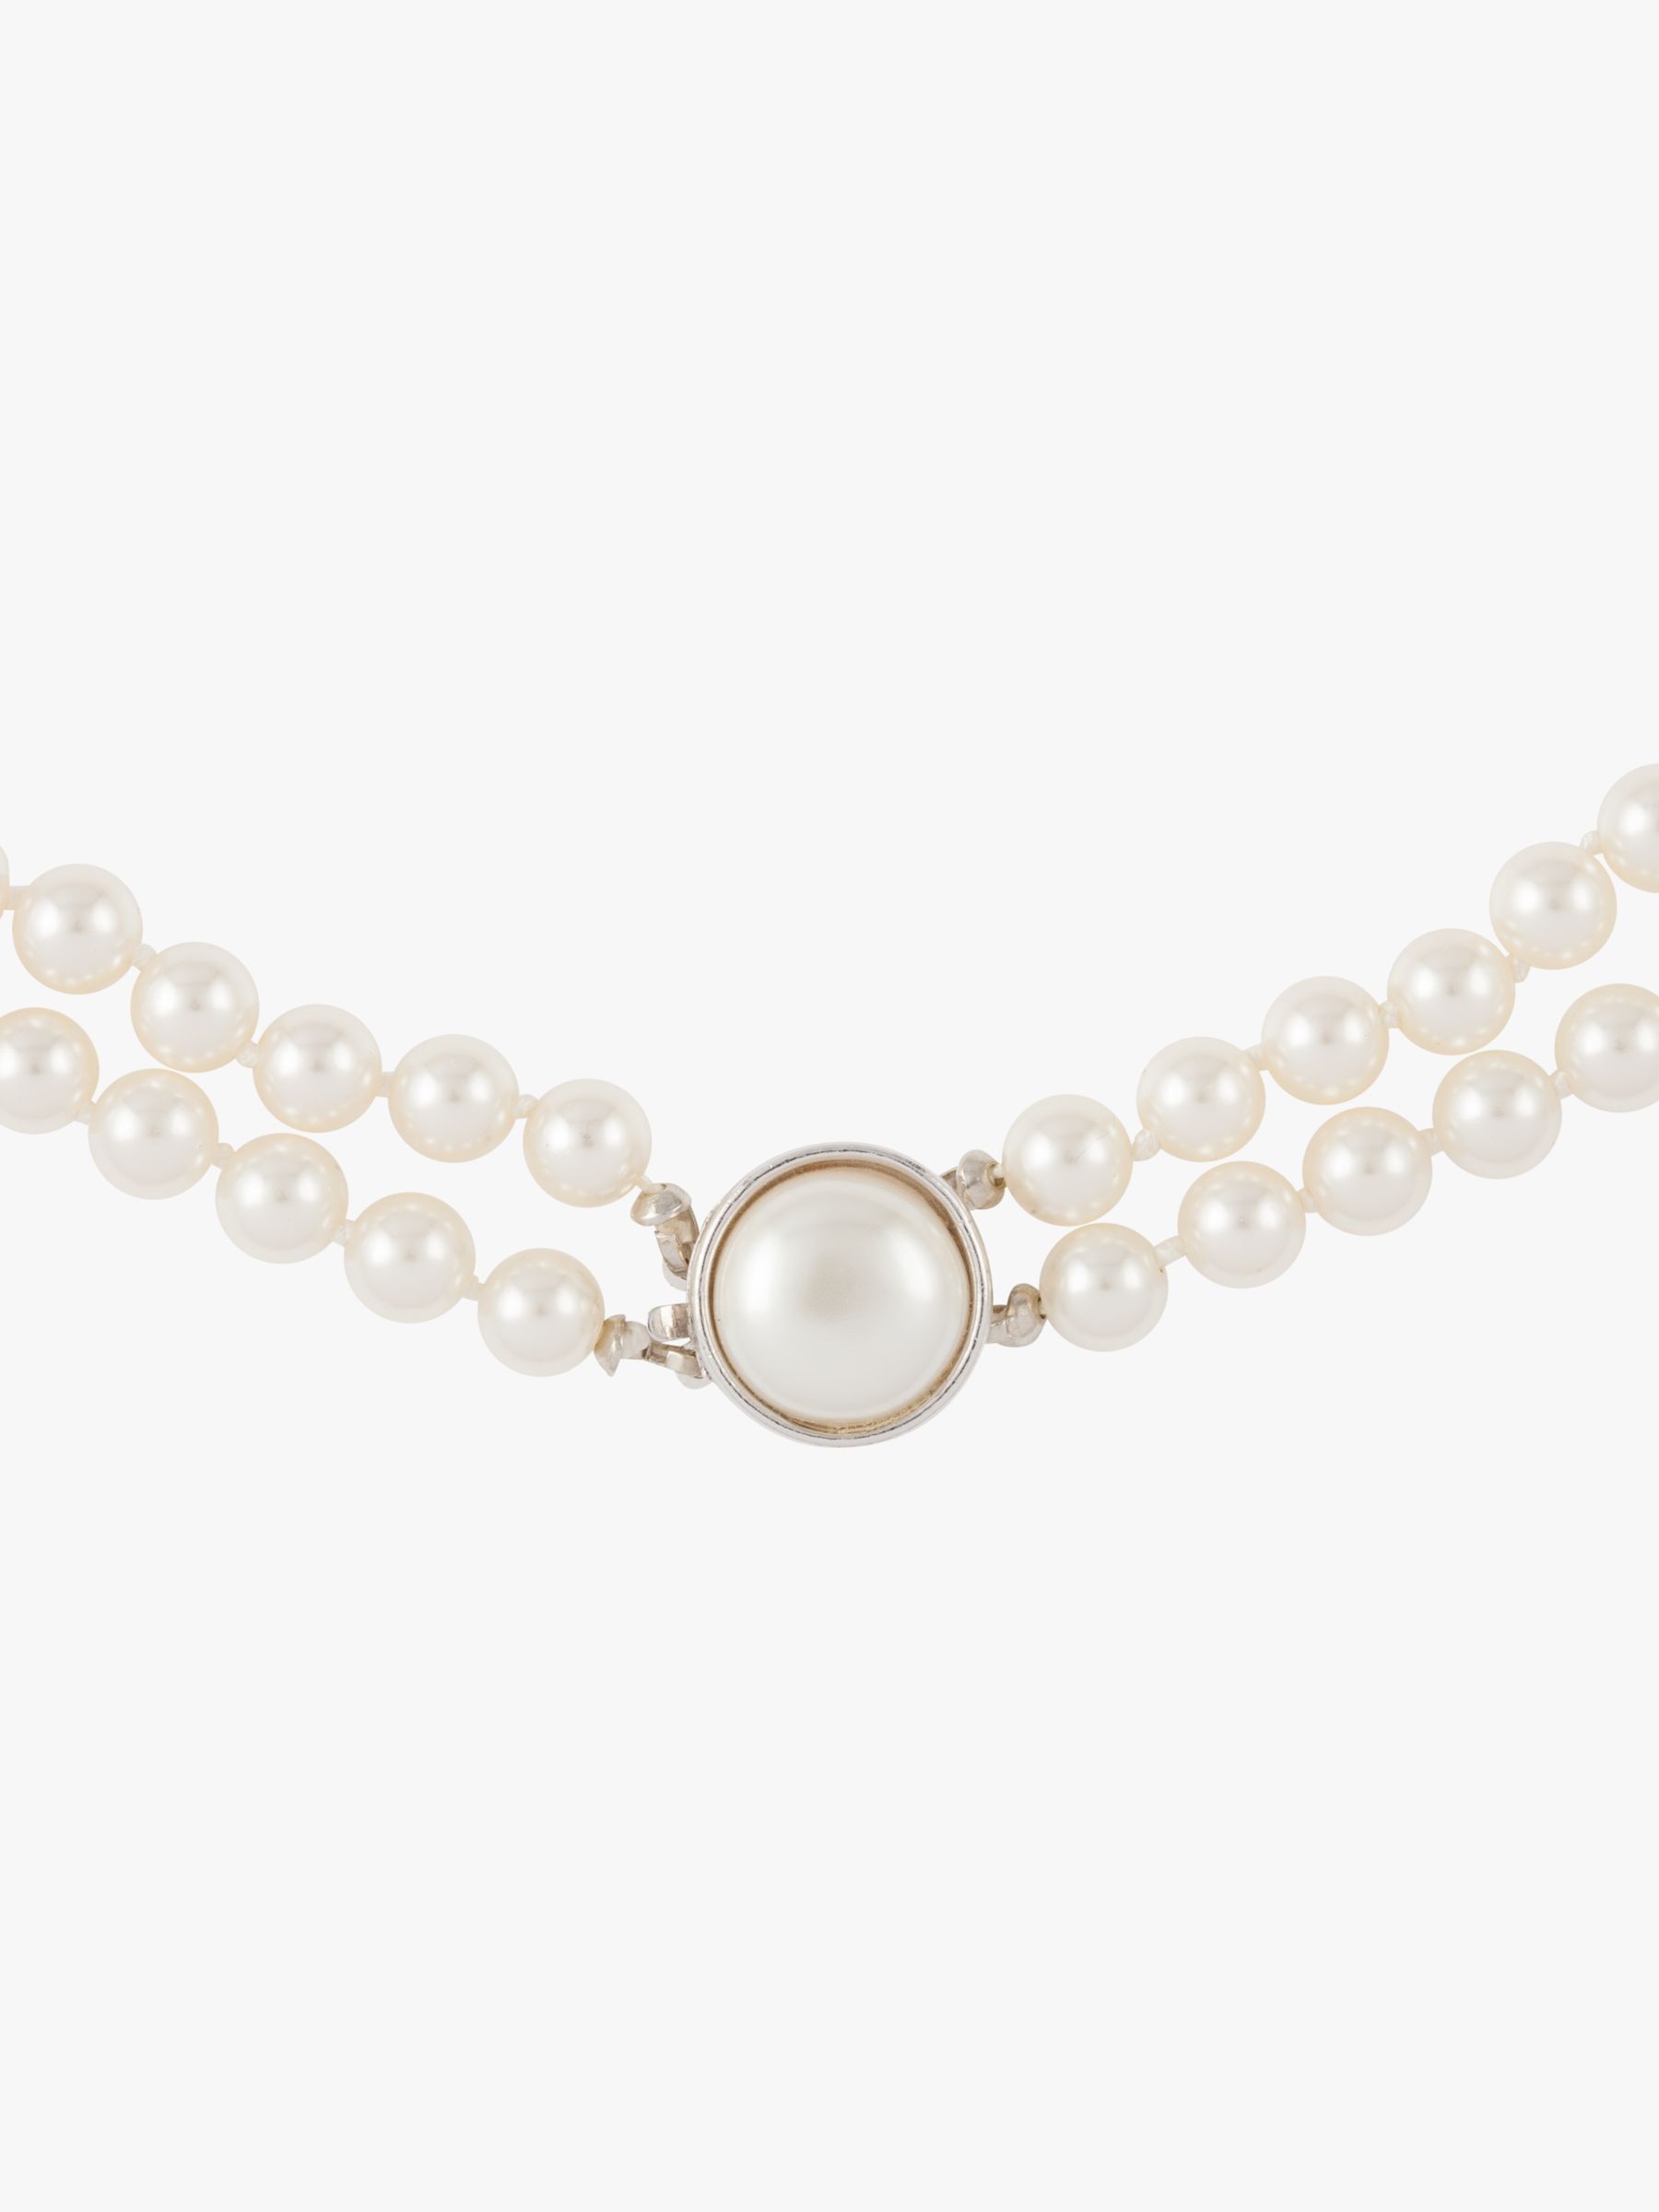 Susan Caplan Vintage Rhodium Plated Faux Pearl Double Row Necklace, White